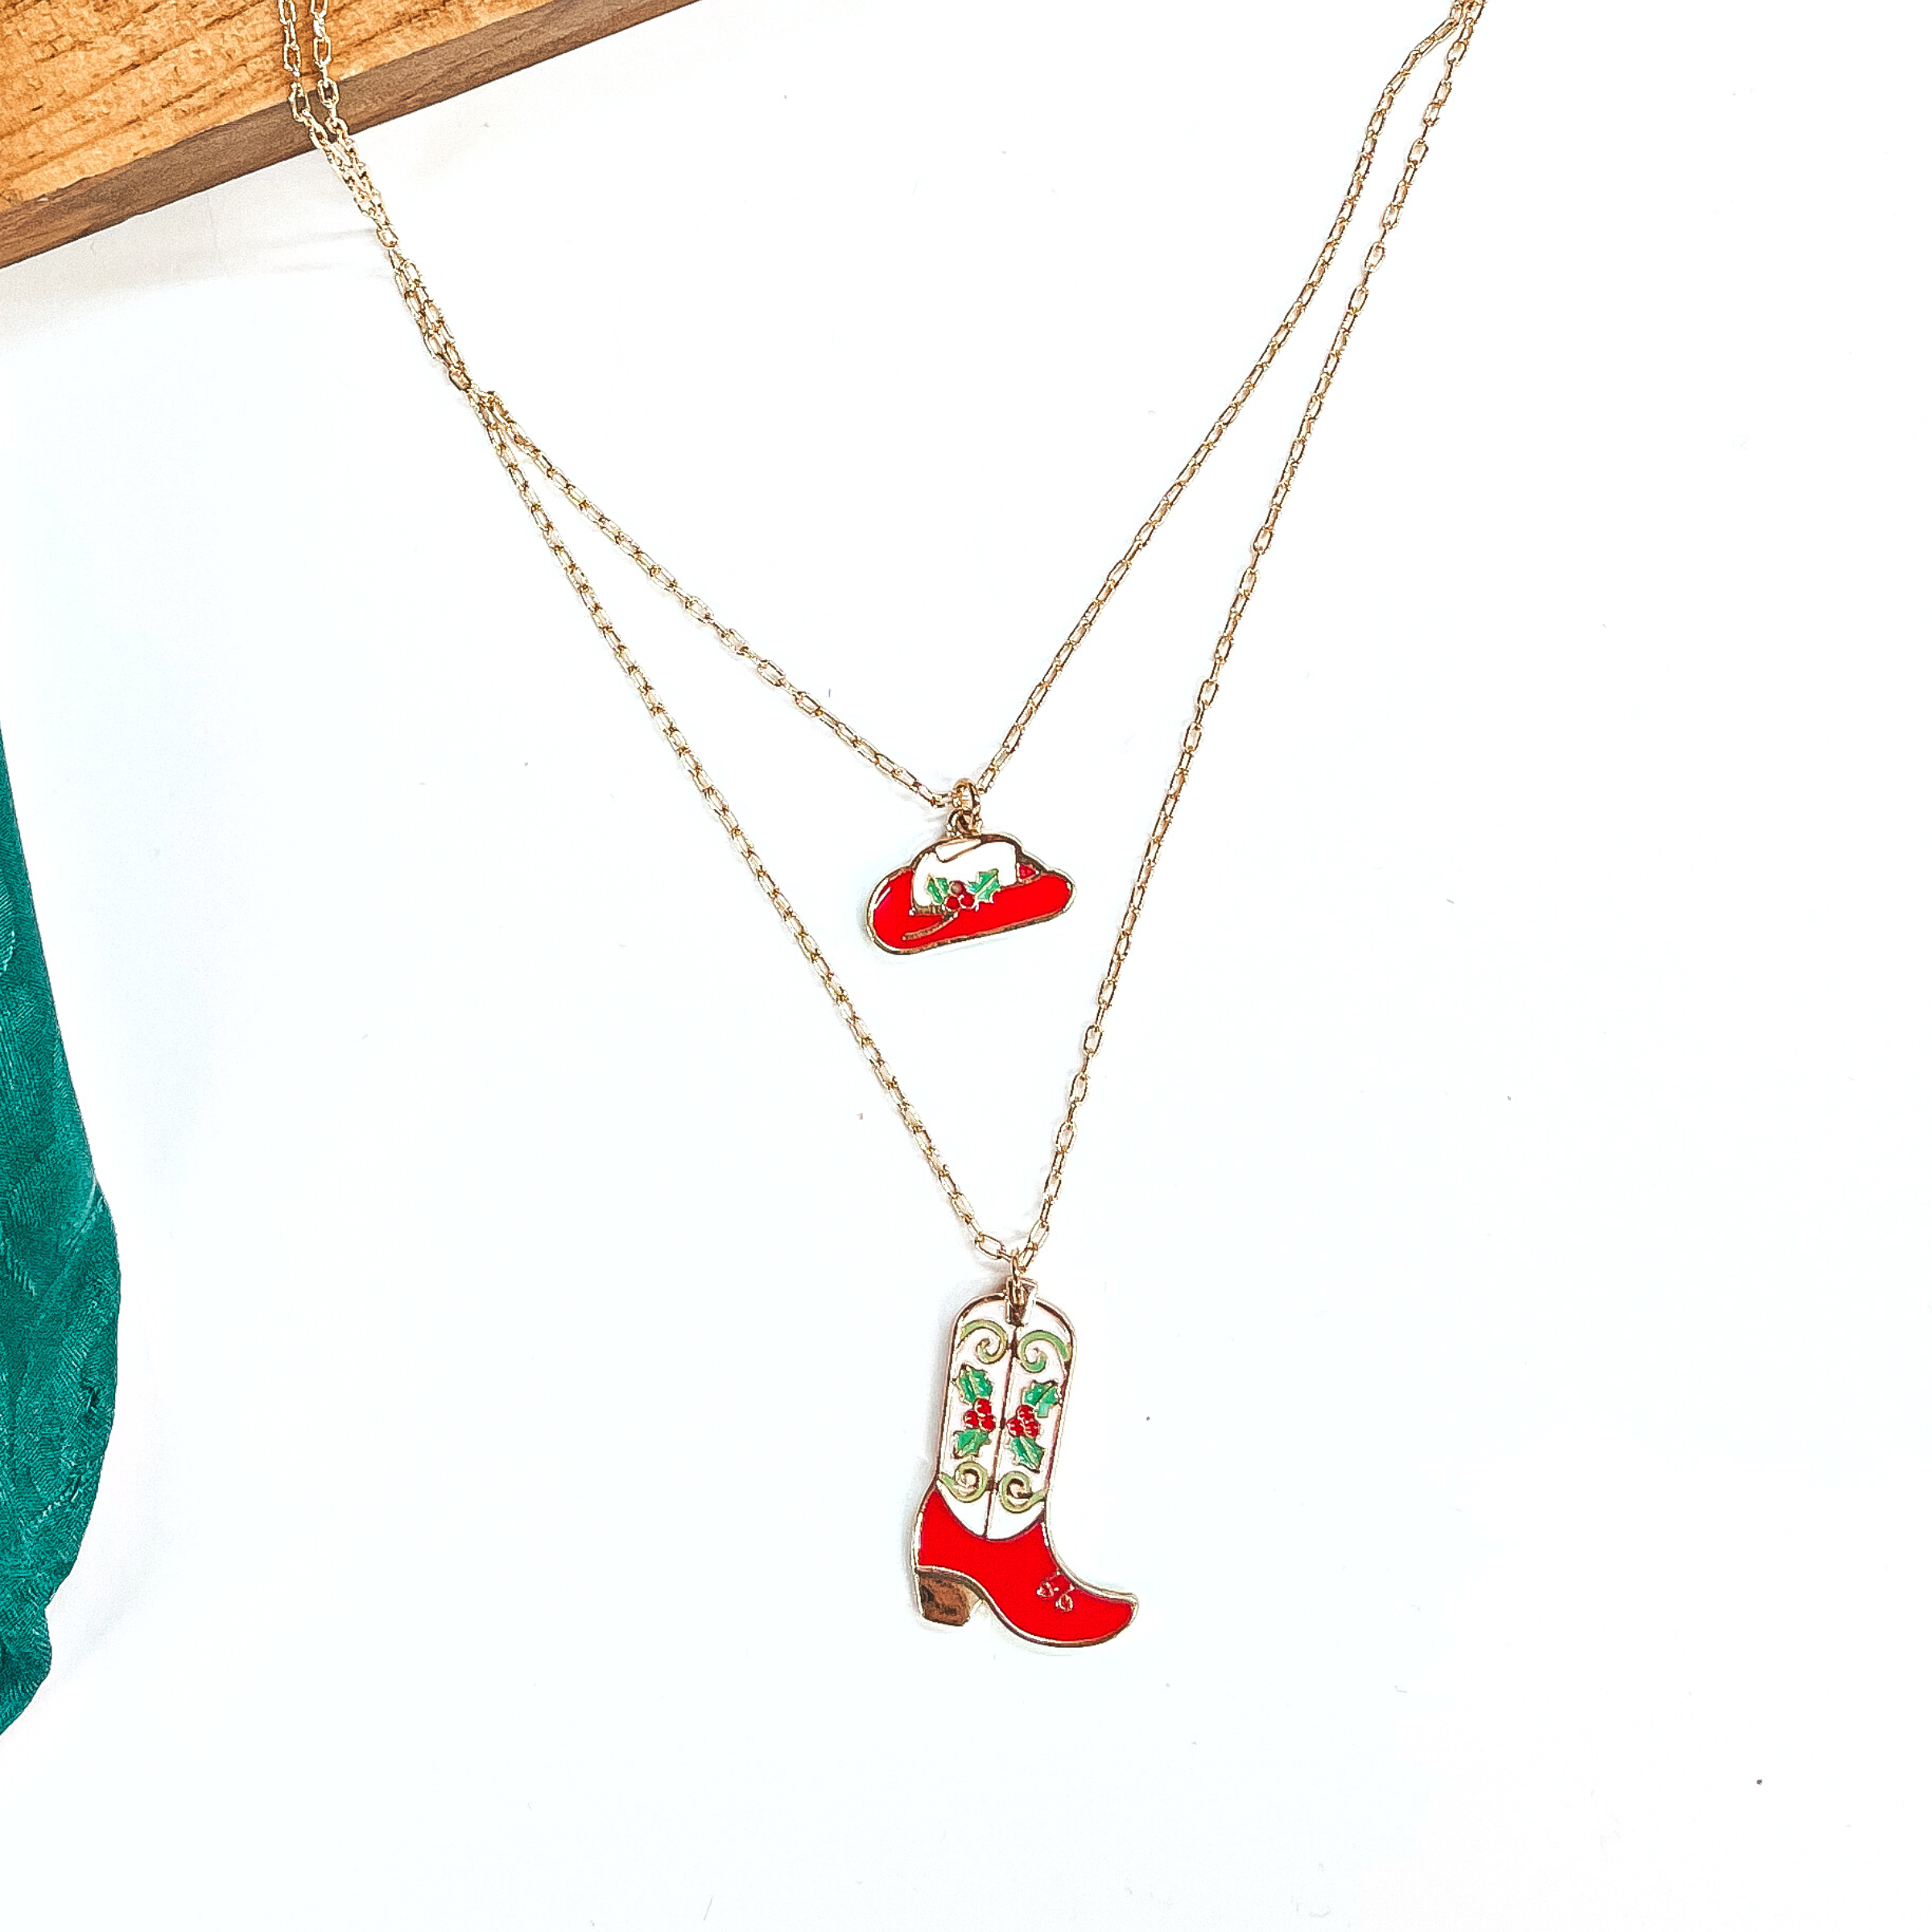 This is a double strand gold necklace with two hanging pendants.  The smaller strand has a hat pendant and the longer strand has a  boot pendant. Both pendants are red and white with mistletoe design  on them in a gold setting. This necklace is laying on a  white background and a slab of wood, with a green wild rag in the side as decor.